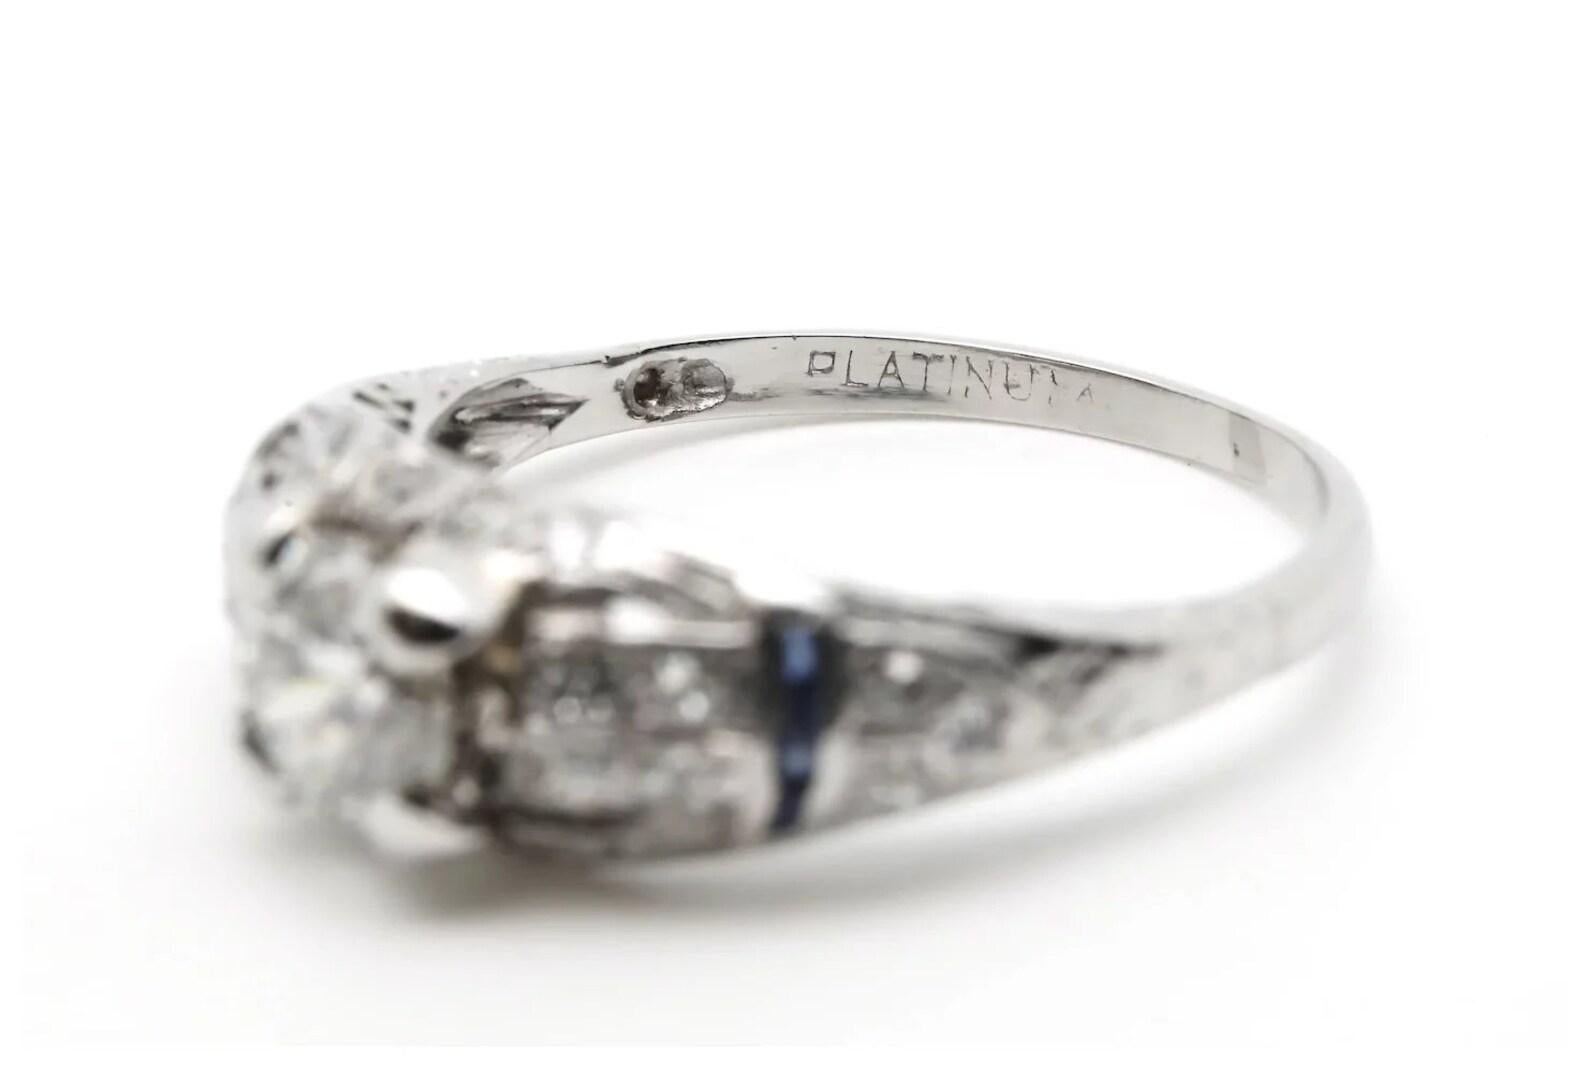 Circa 1920's Art Deco 1.15ctw Diamond & Sapphire Engagement Ring in Platinum In Good Condition For Sale In Boston, MA